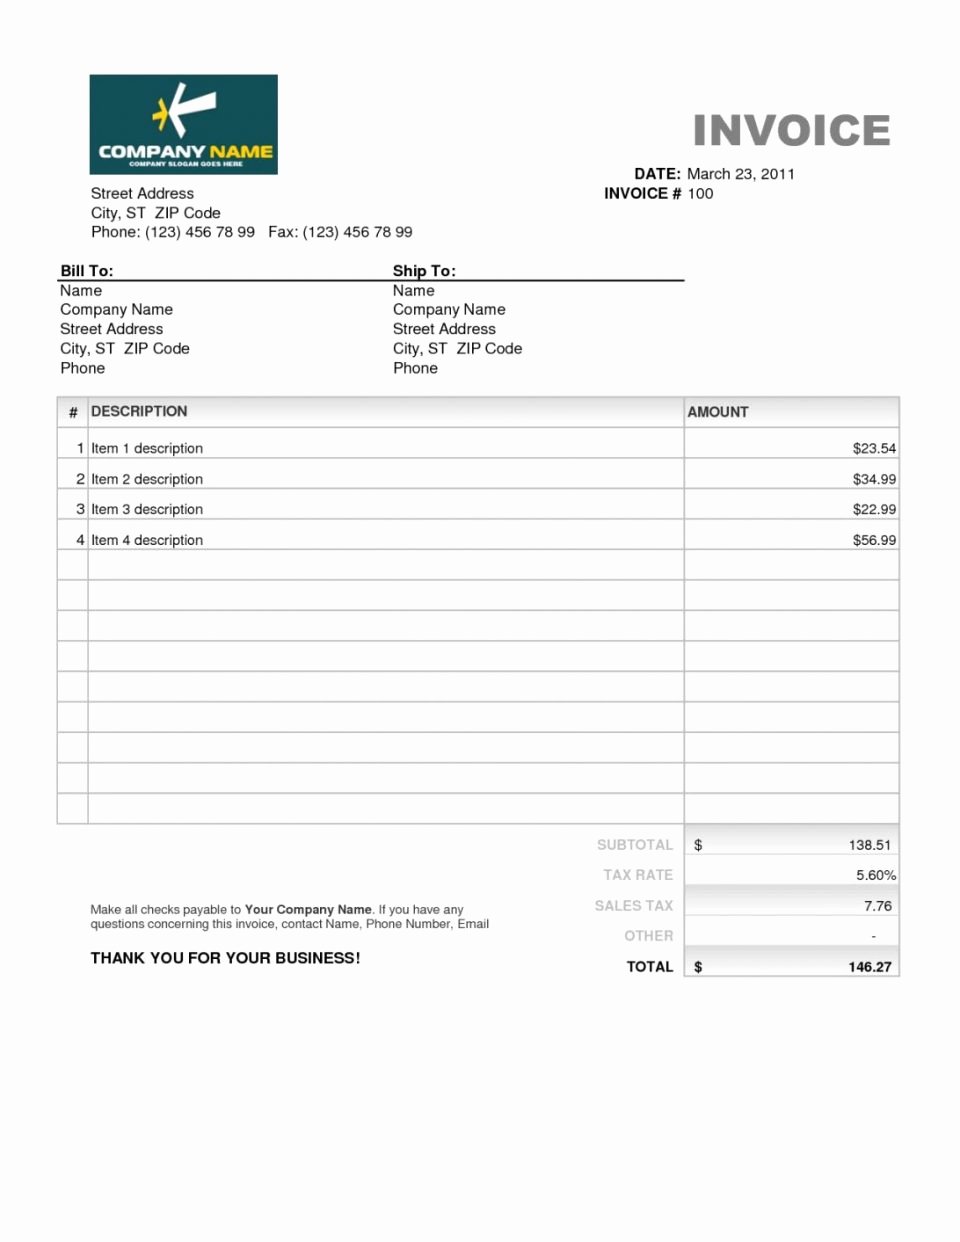 Rent Invoice Template Word New Invoice Designparty Rental Template Party Tax Australia